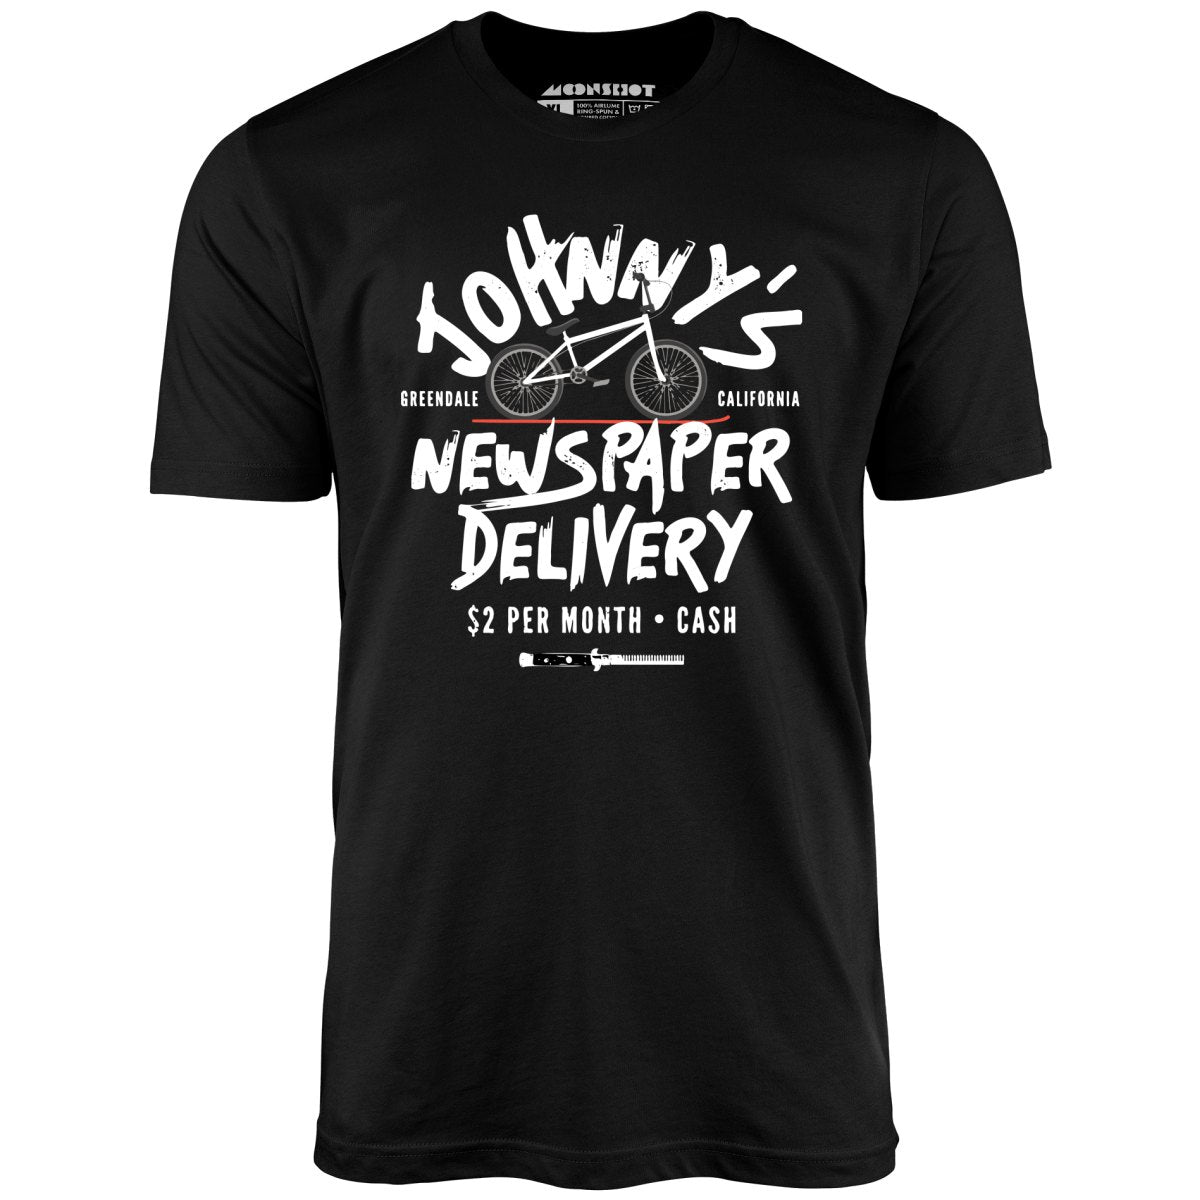 Johnny's Newspaper Delivery - Unisex T-Shirt